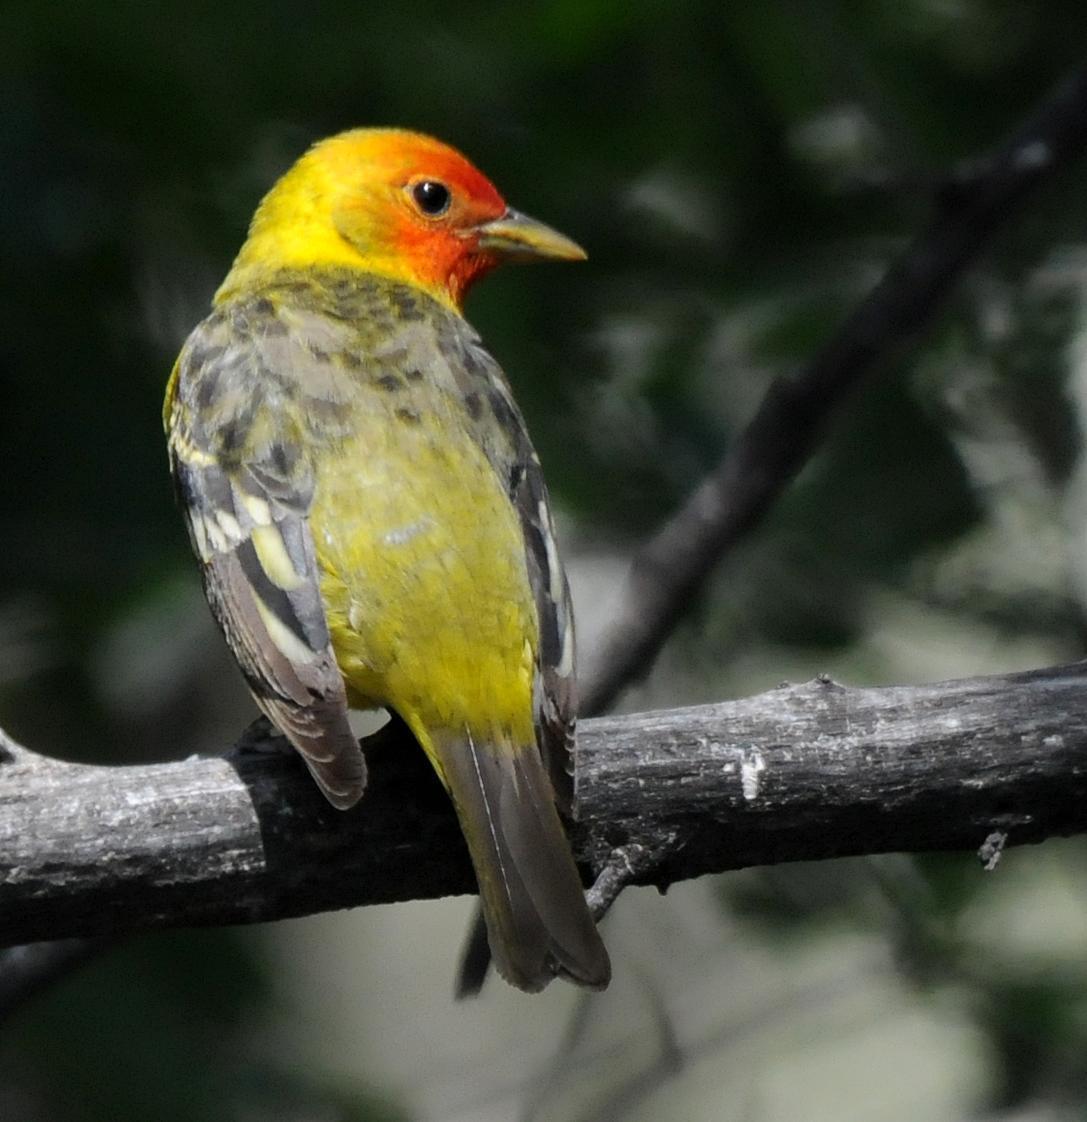 Western Tanager Photo by Steven Mlodinow